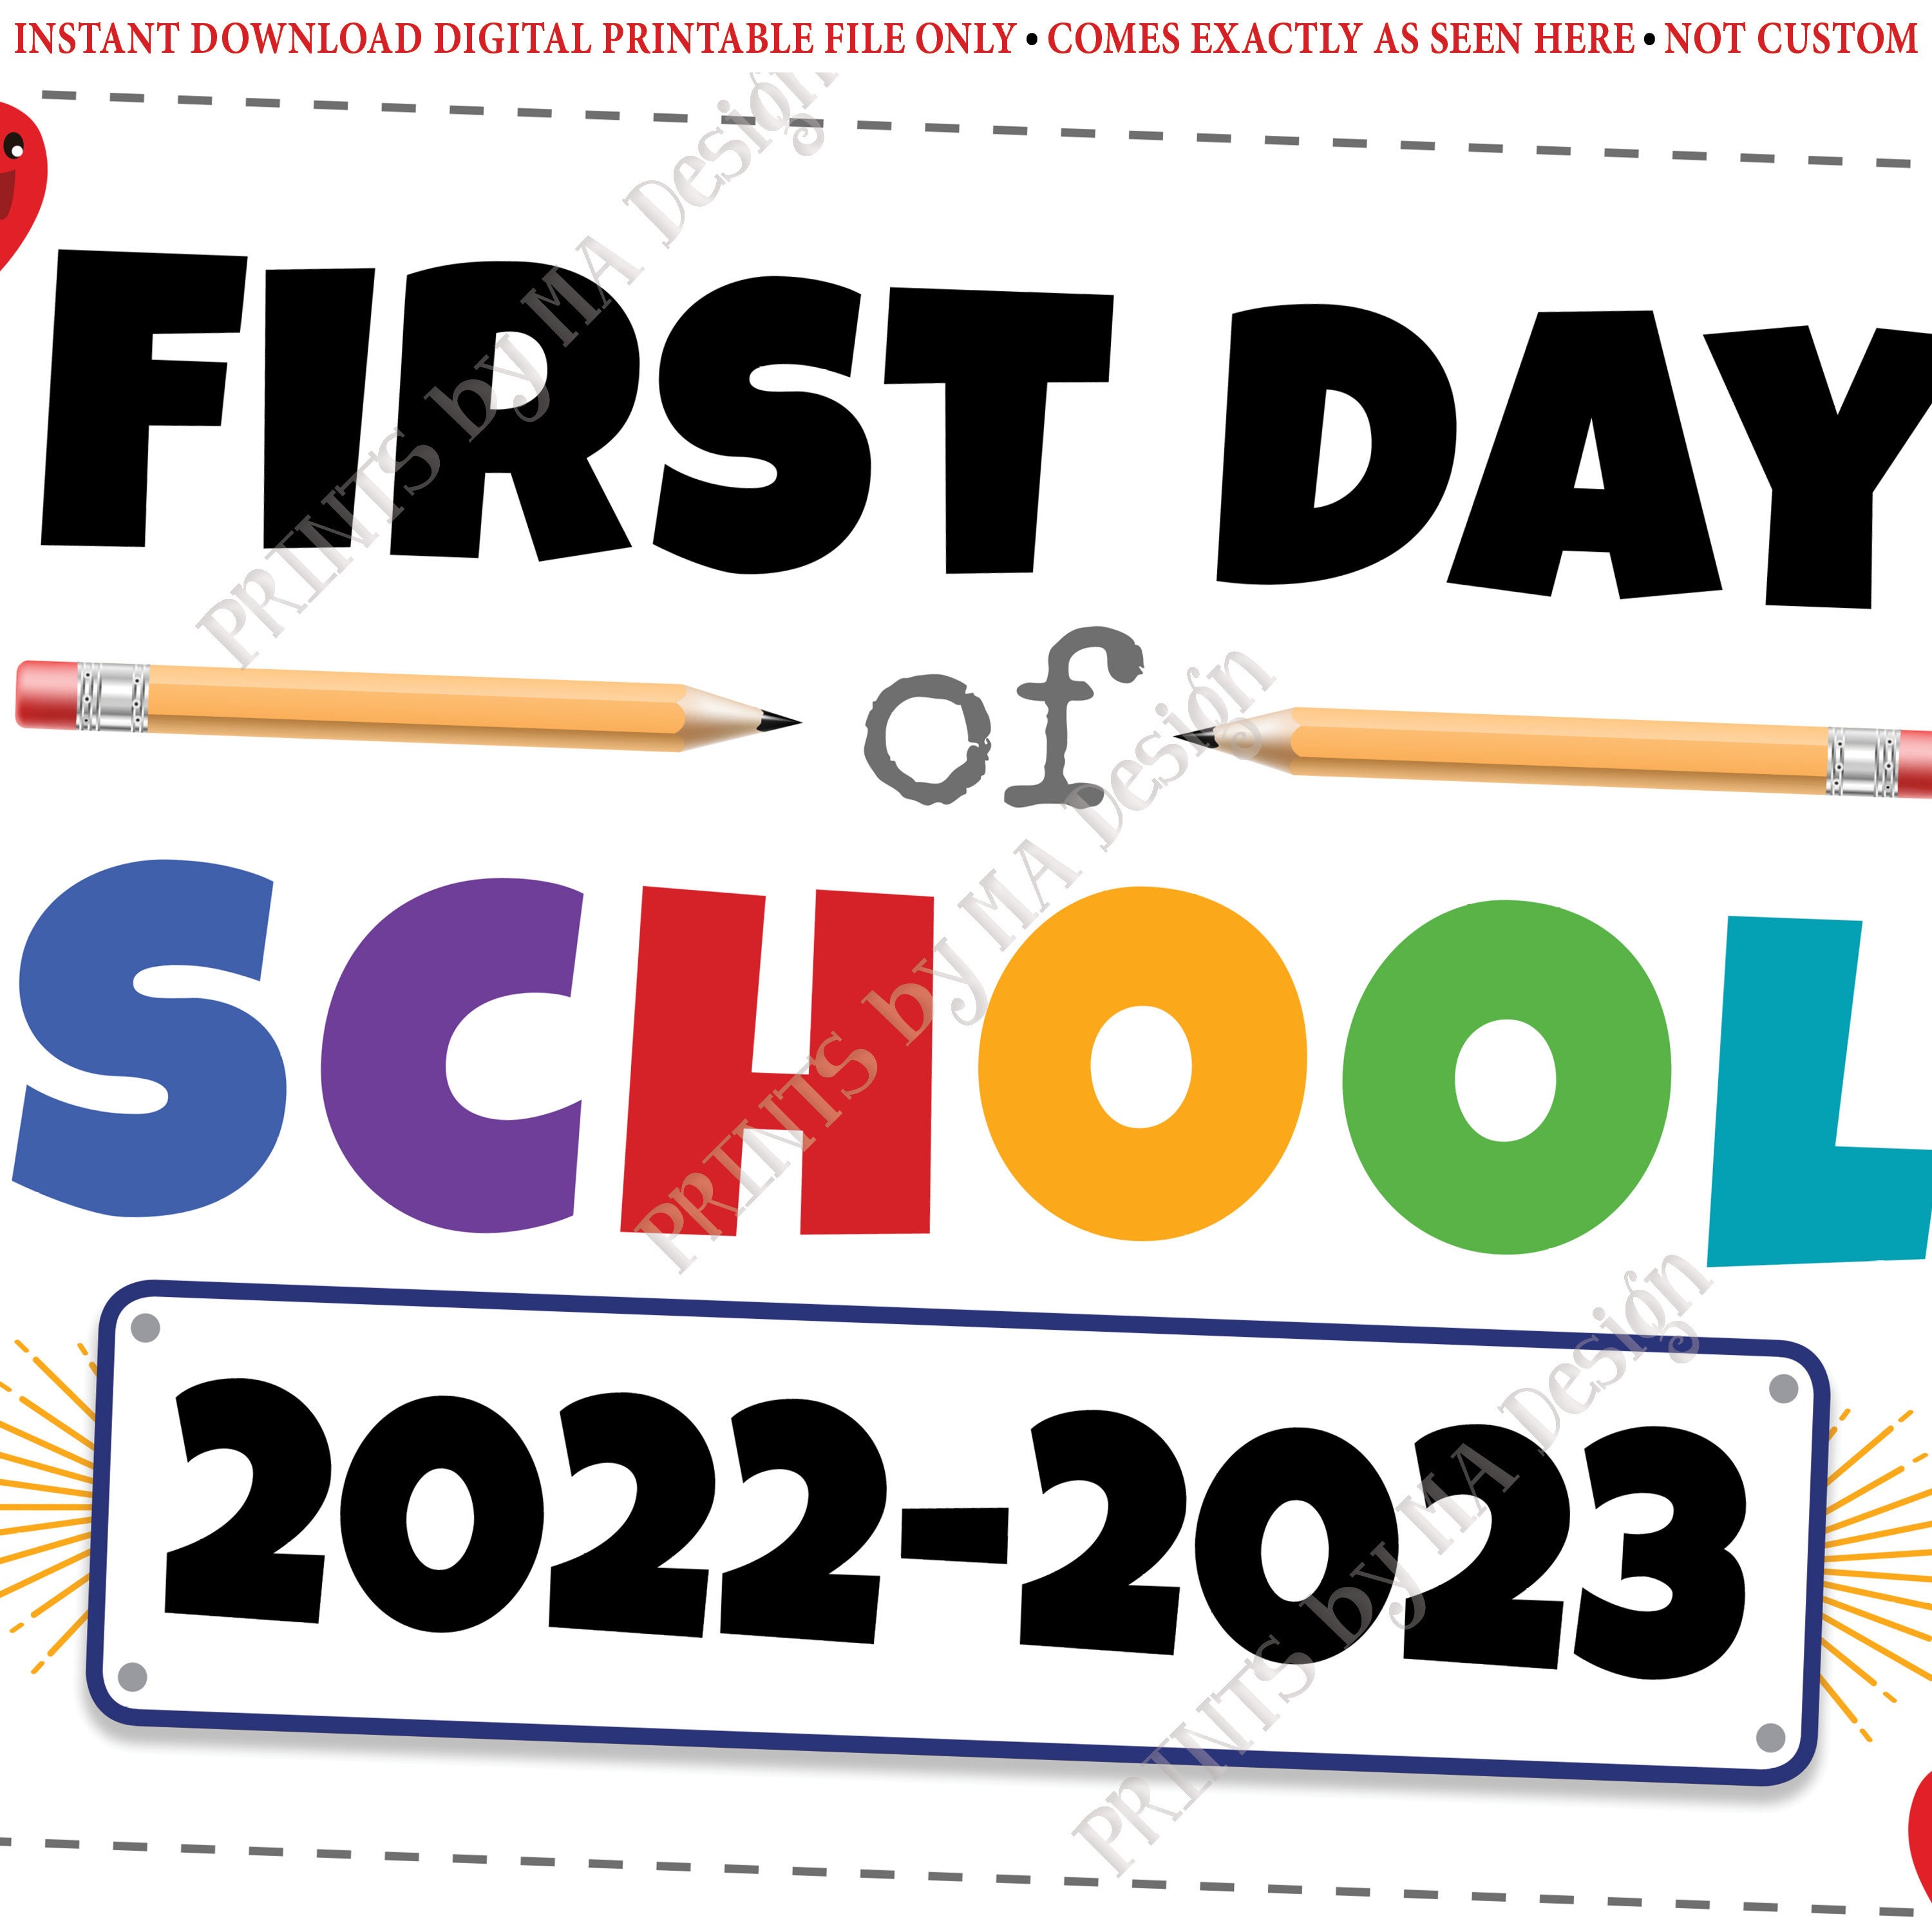 First Day of School Sign, 20222023 dated PRINTABLE 8x10/16x20” Back to